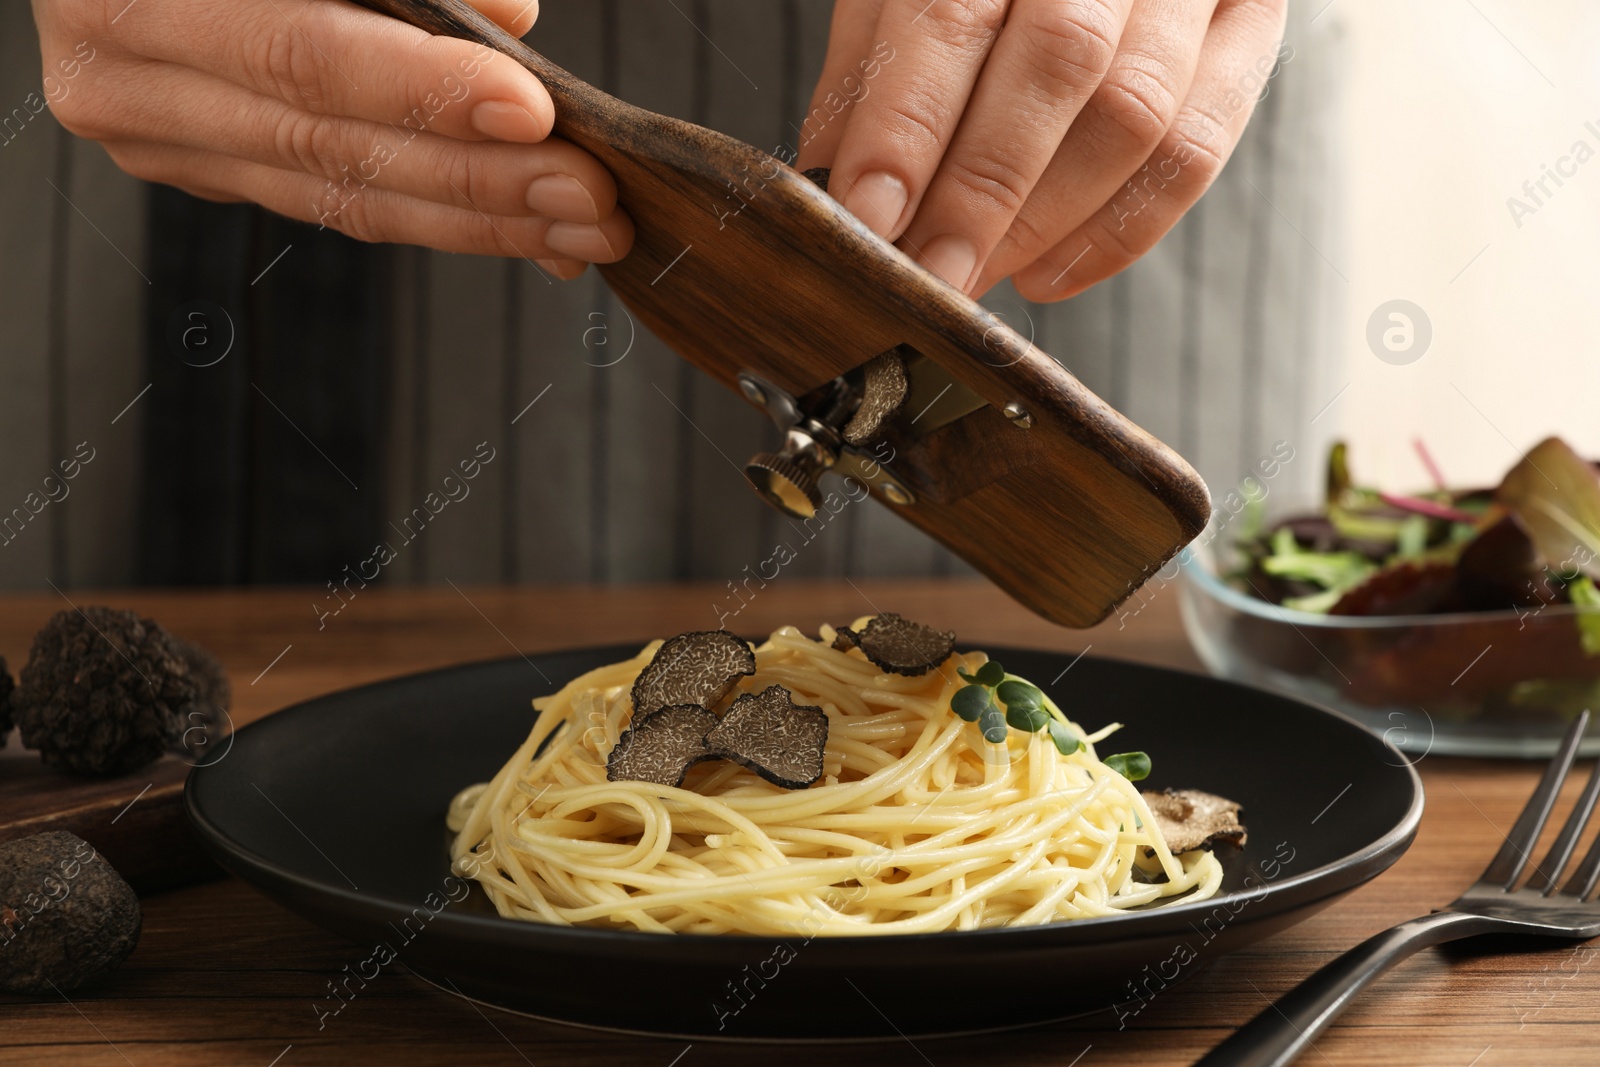 Photo of Woman slicing truffle onto spaghetti at wooden table, closeup